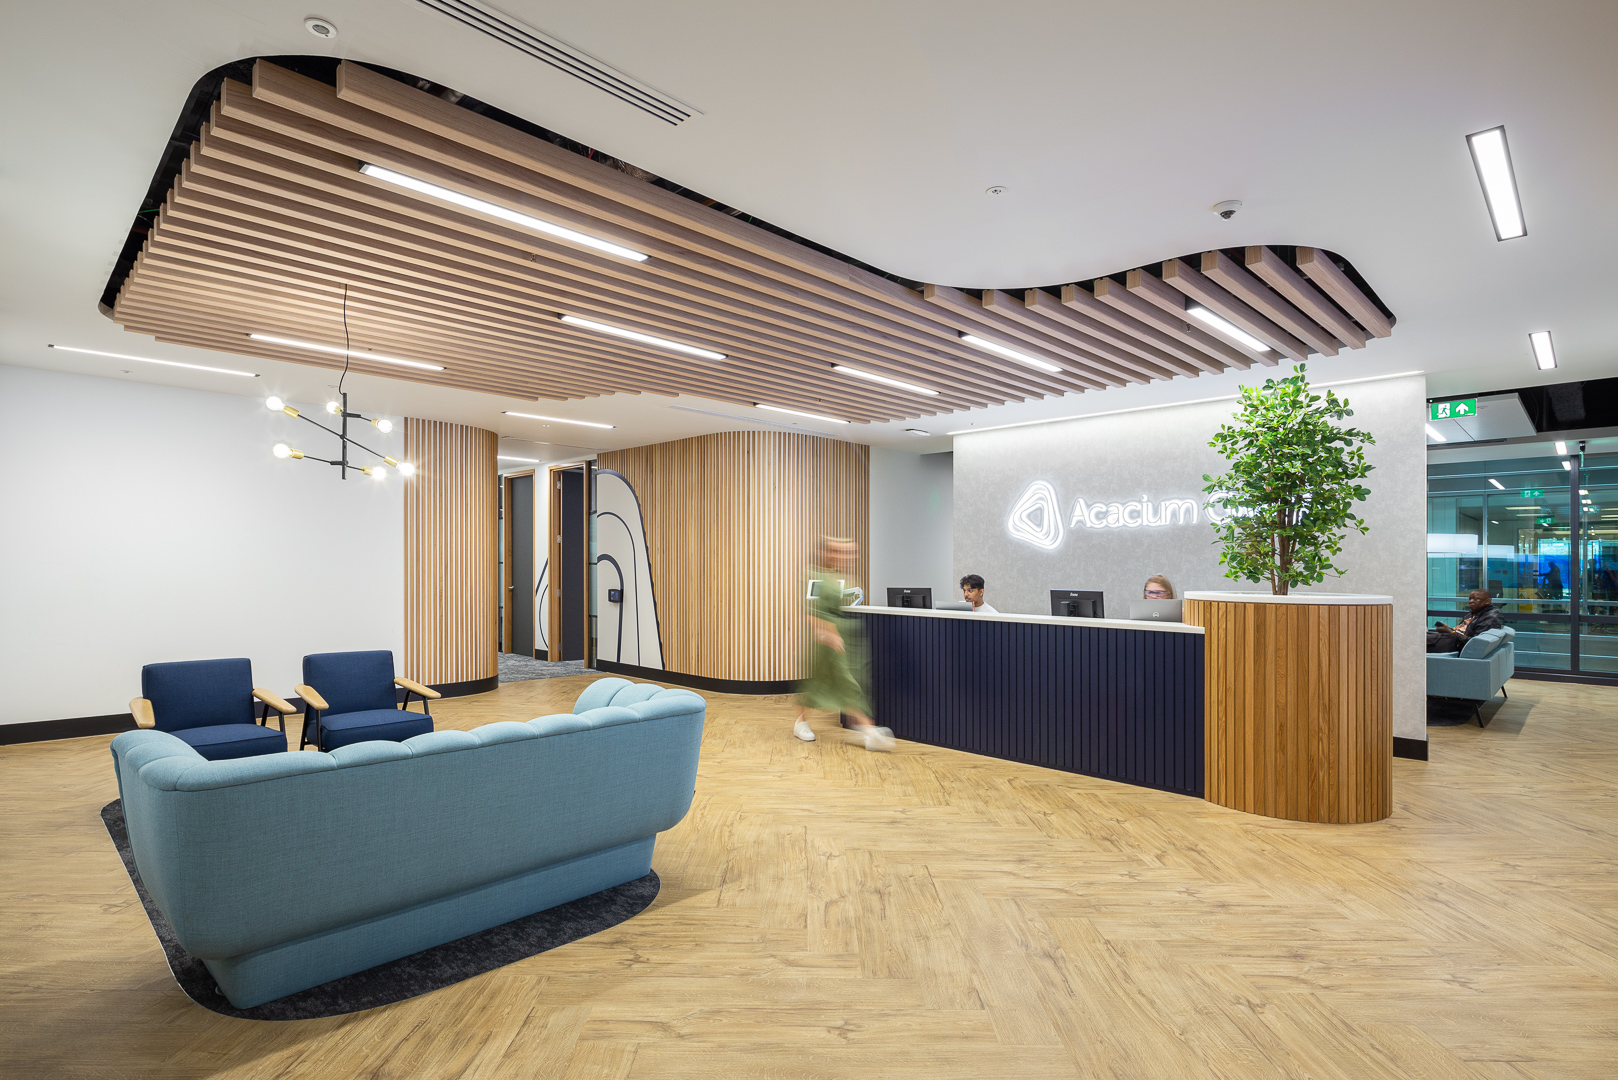 Architecture & office interior photography - Acacium London by Midi Photography